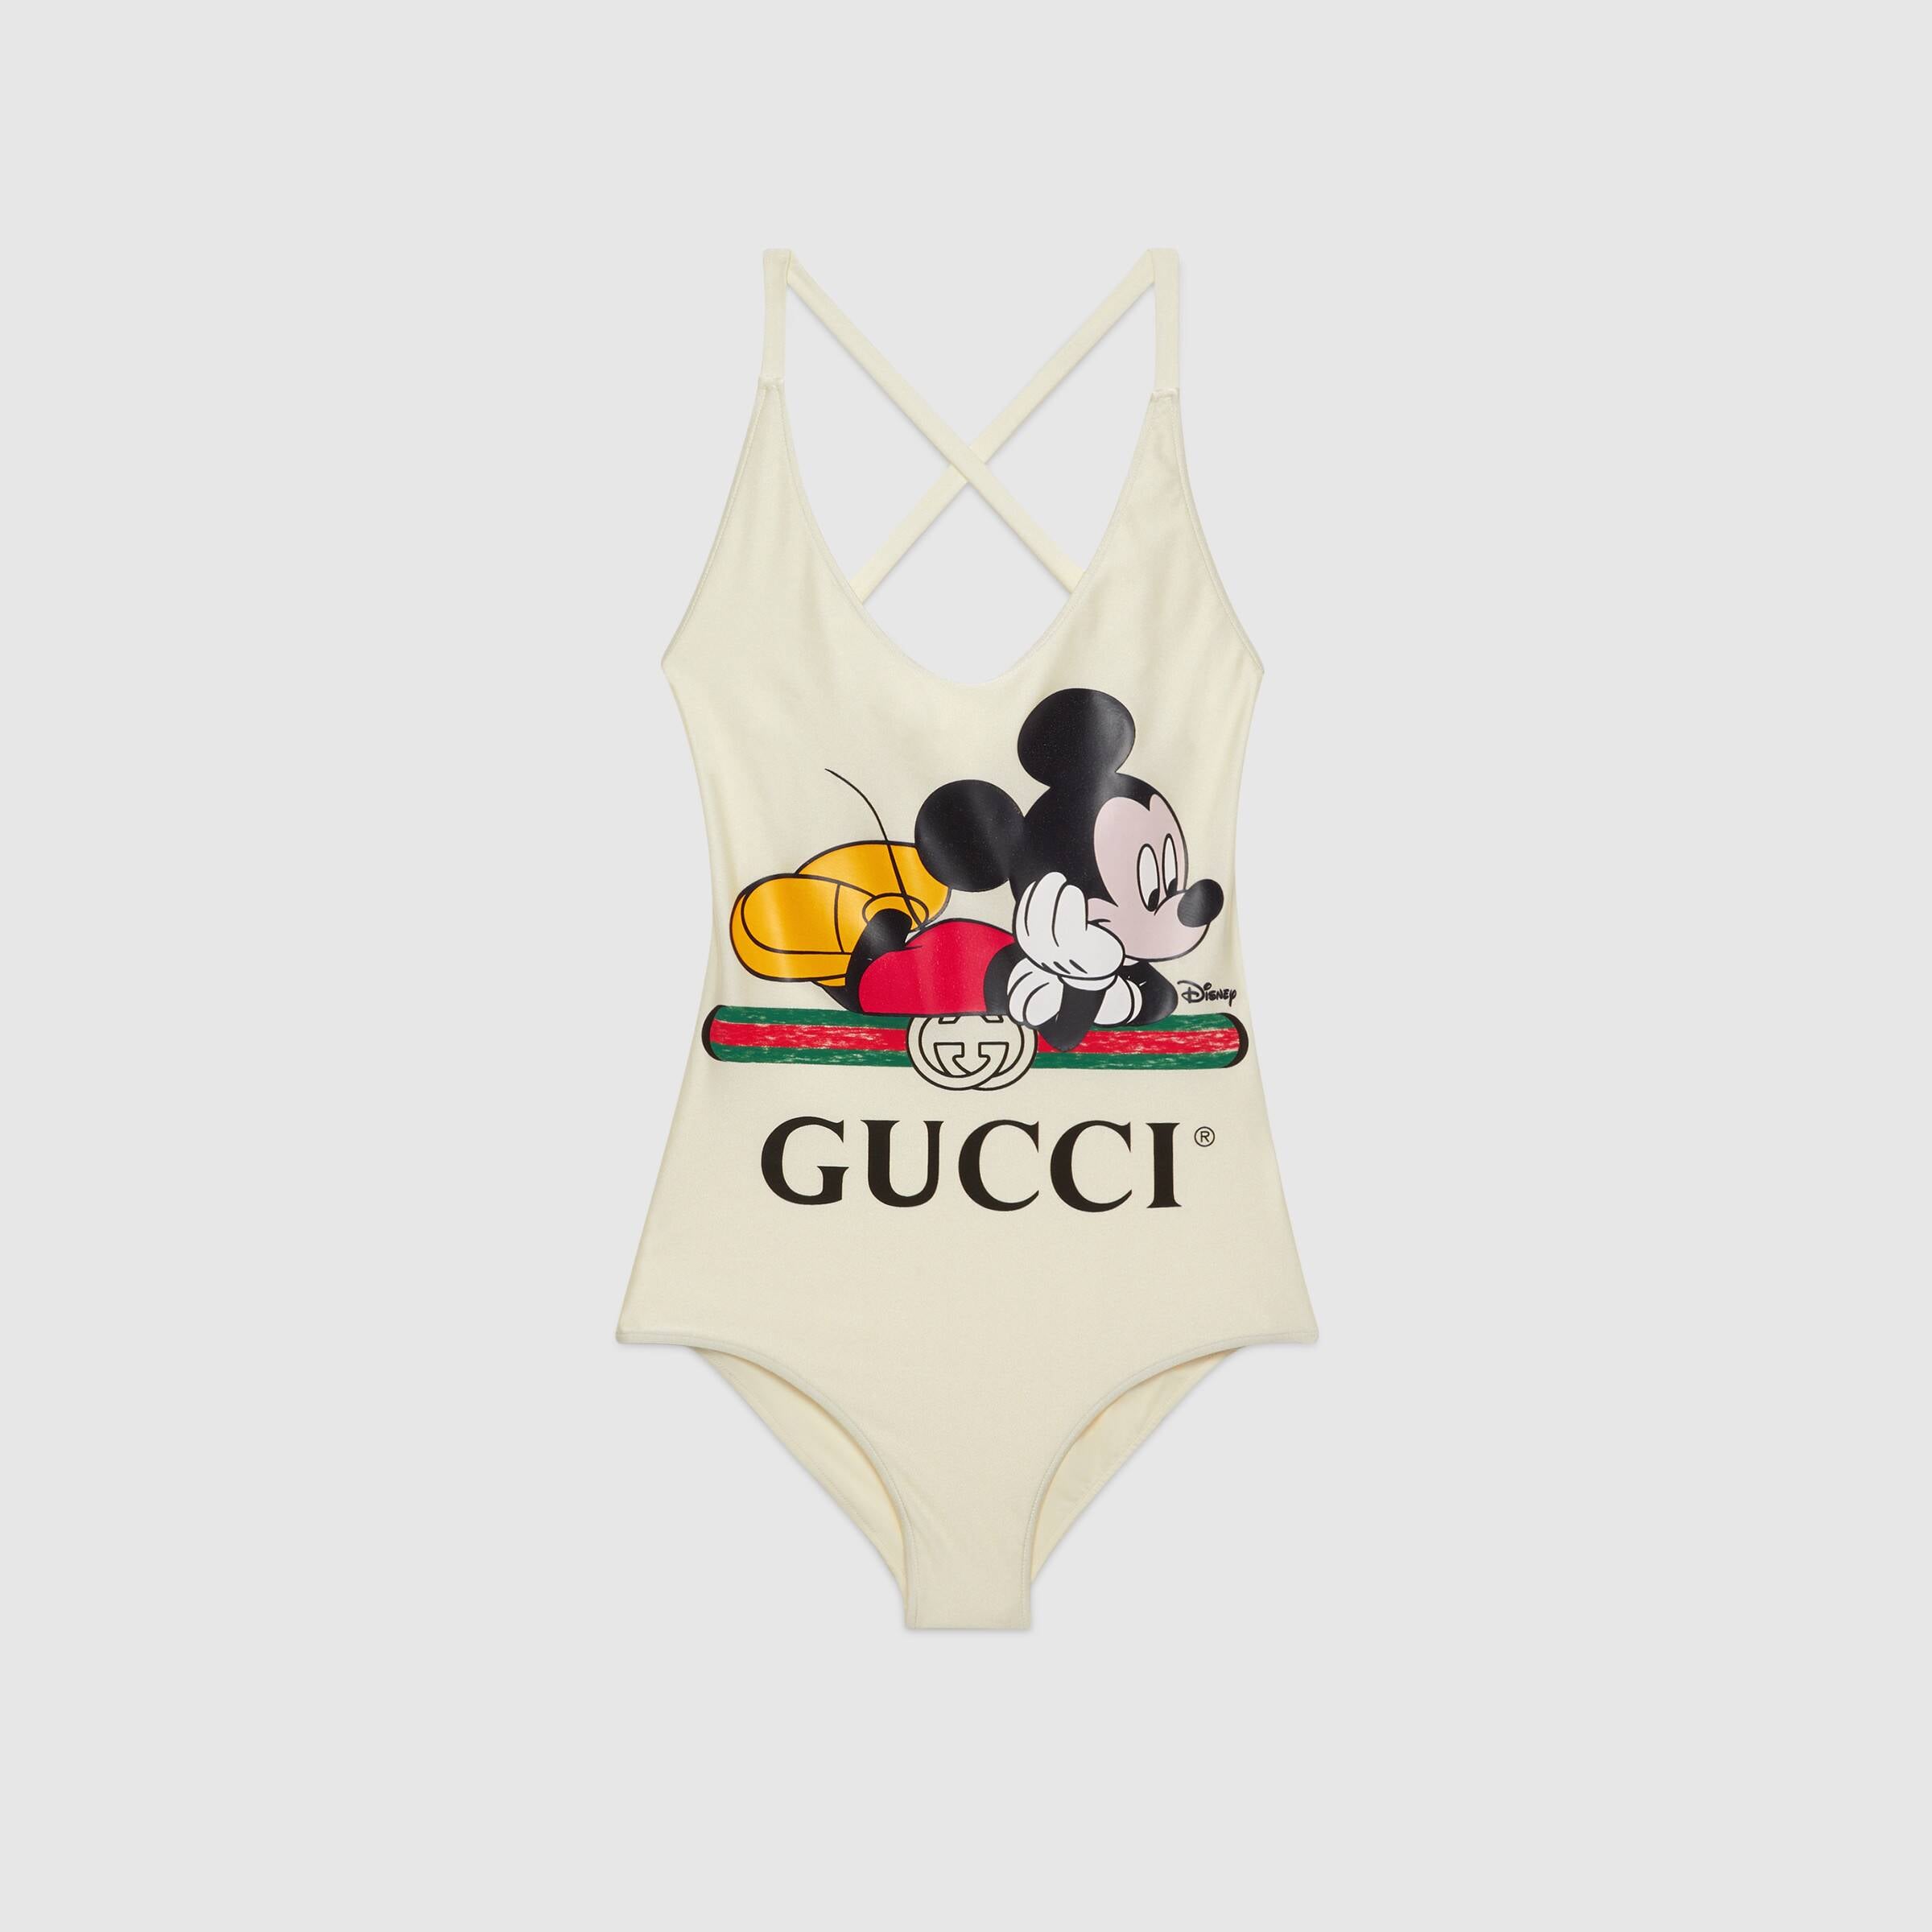 Disney x Gucci Mickey Mouse Collection